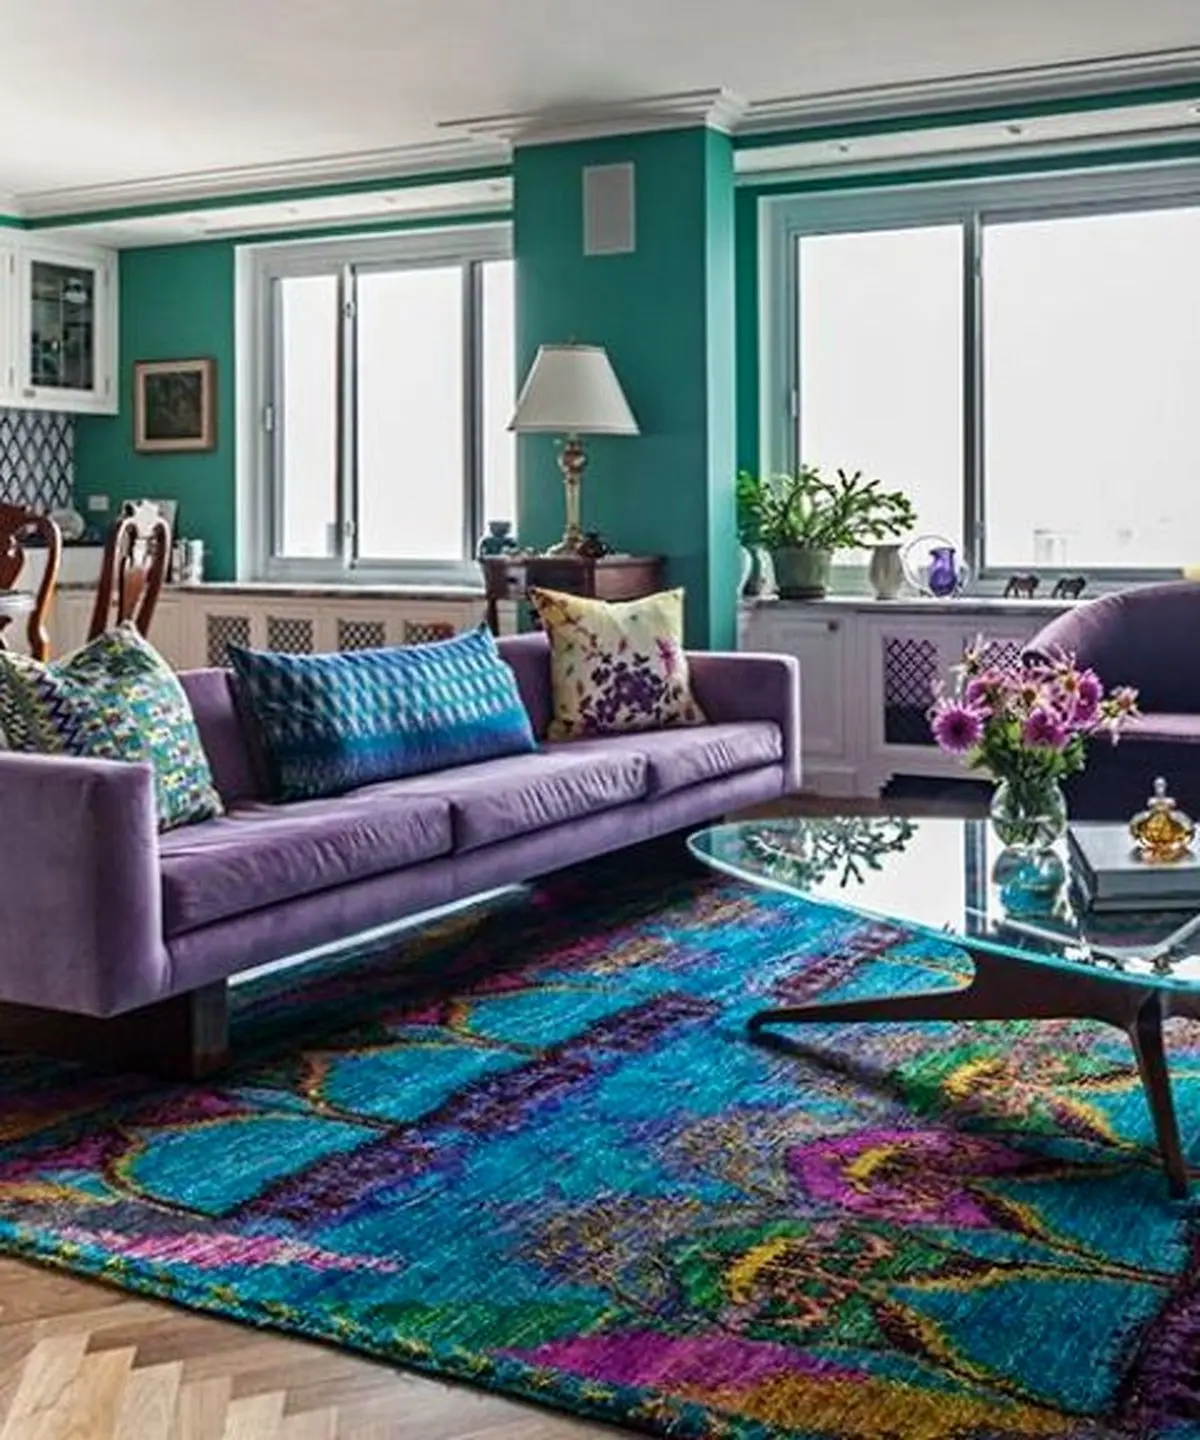 02-a-bright-living-room-with-green-walls-a-purple-sofa-and-chairs-a-bright-rug-with-purple-touches-and-a-glass-coffee-table